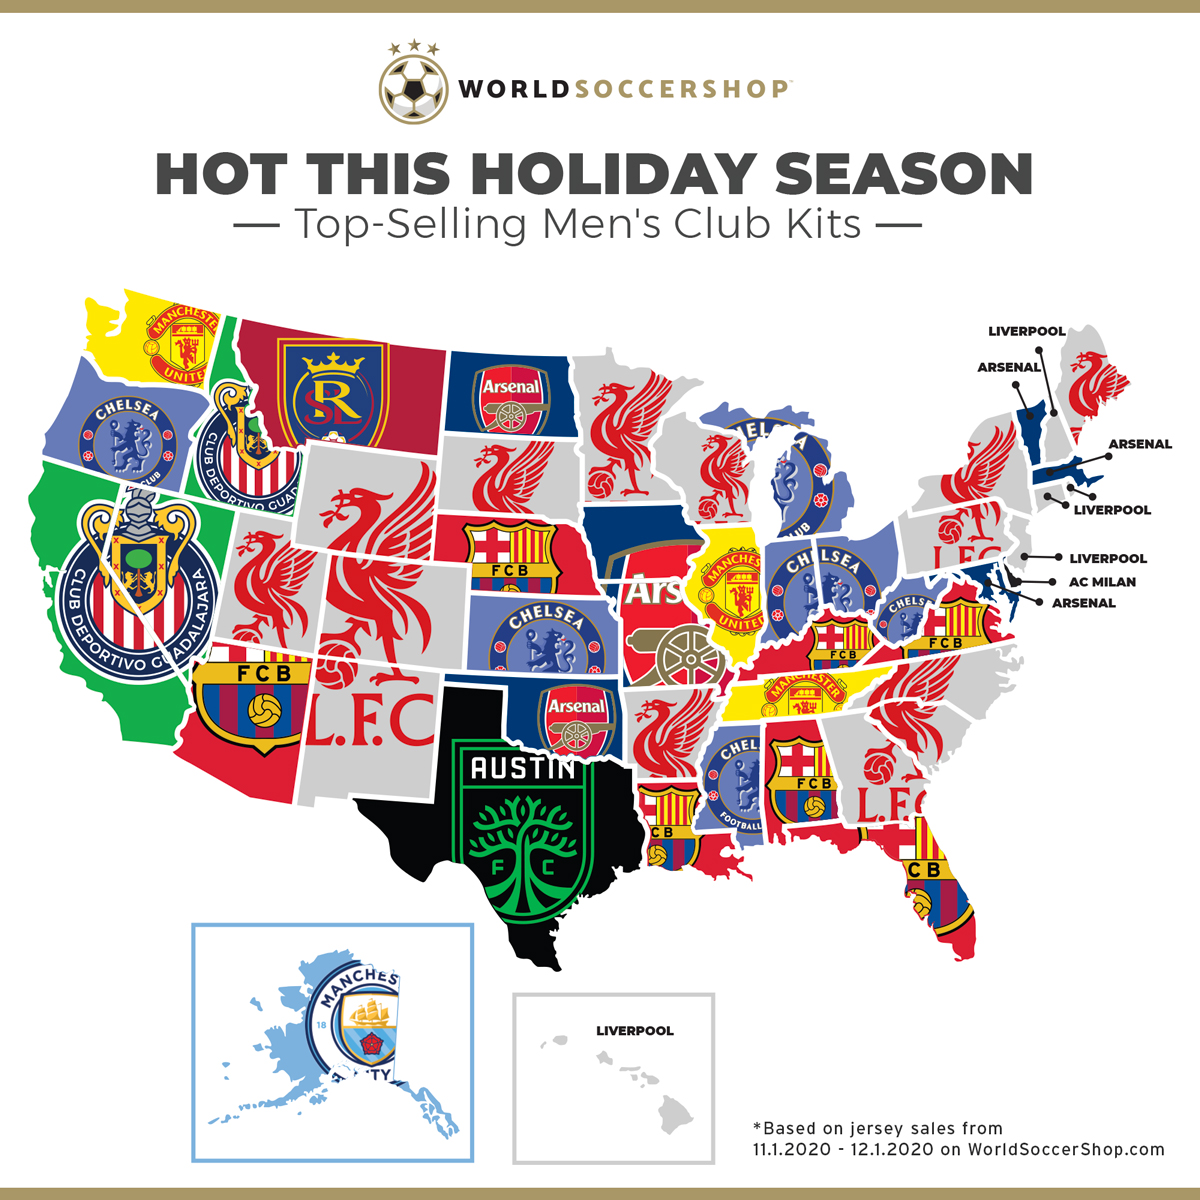 Marketing, Premier League monopoly in the US: Leading the Italian Serie A team in Delaware